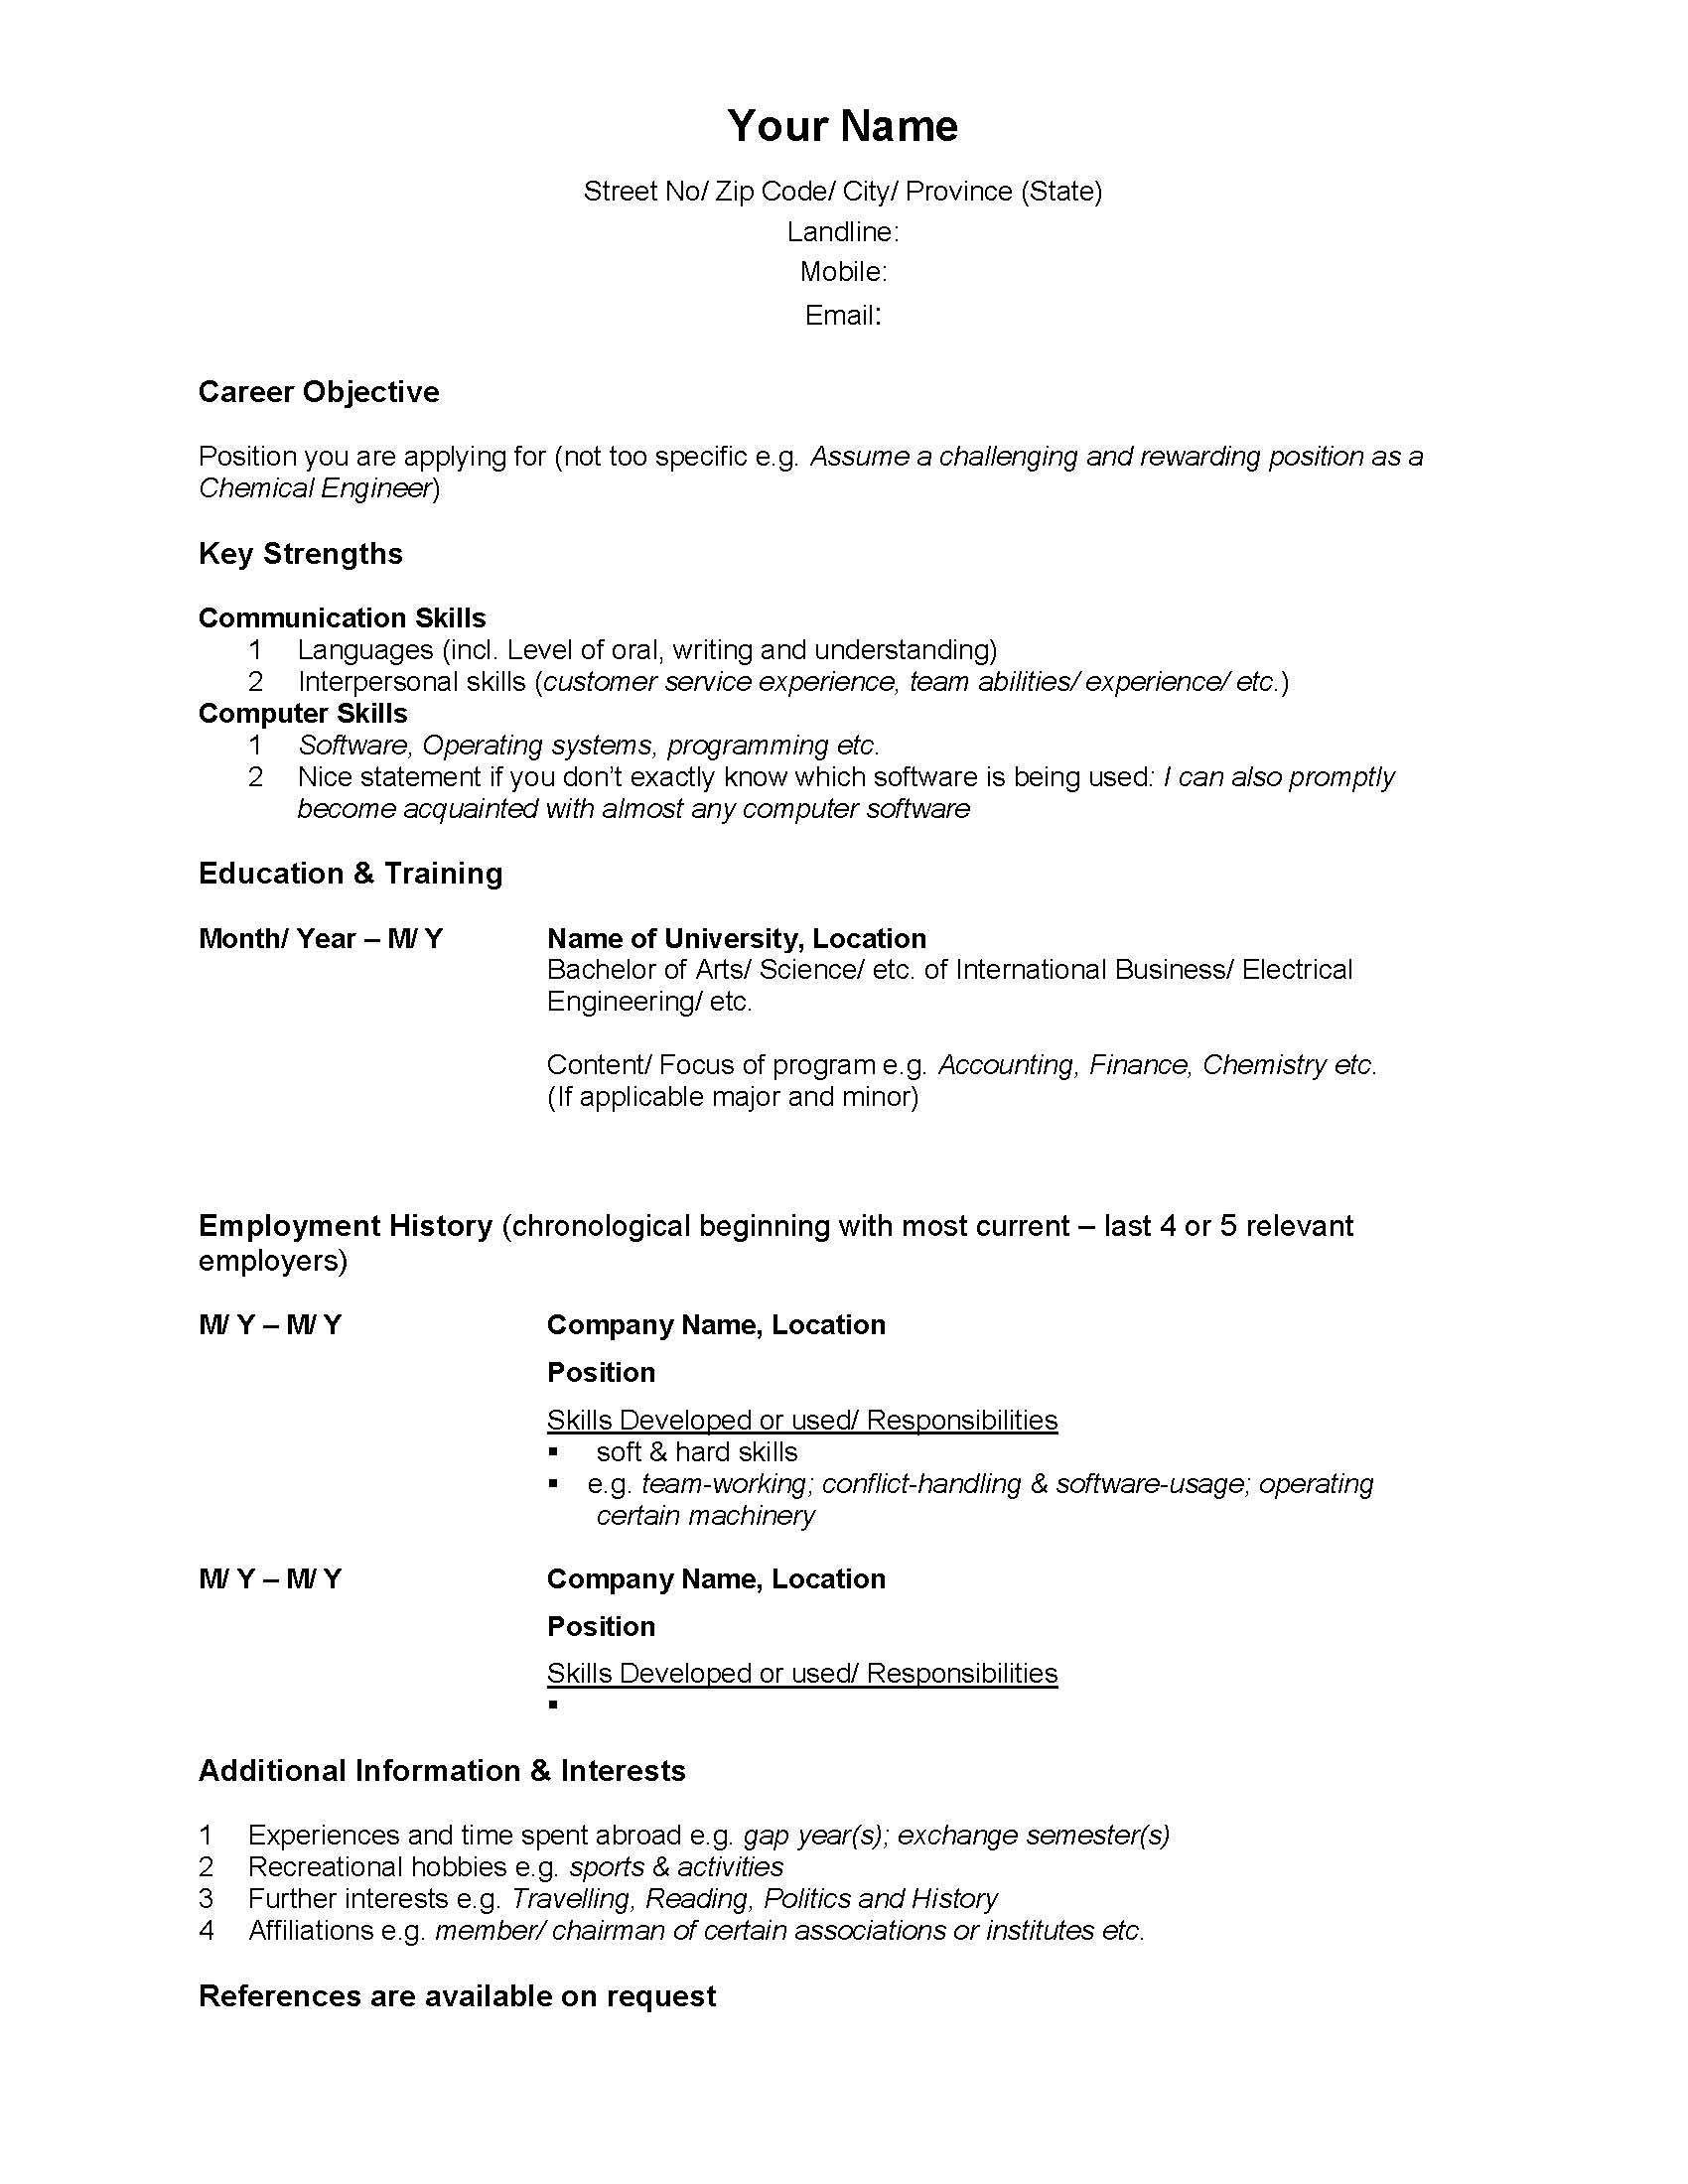 Unique Resume Ideas Resume Templates For High School Students Fresh High School Resume